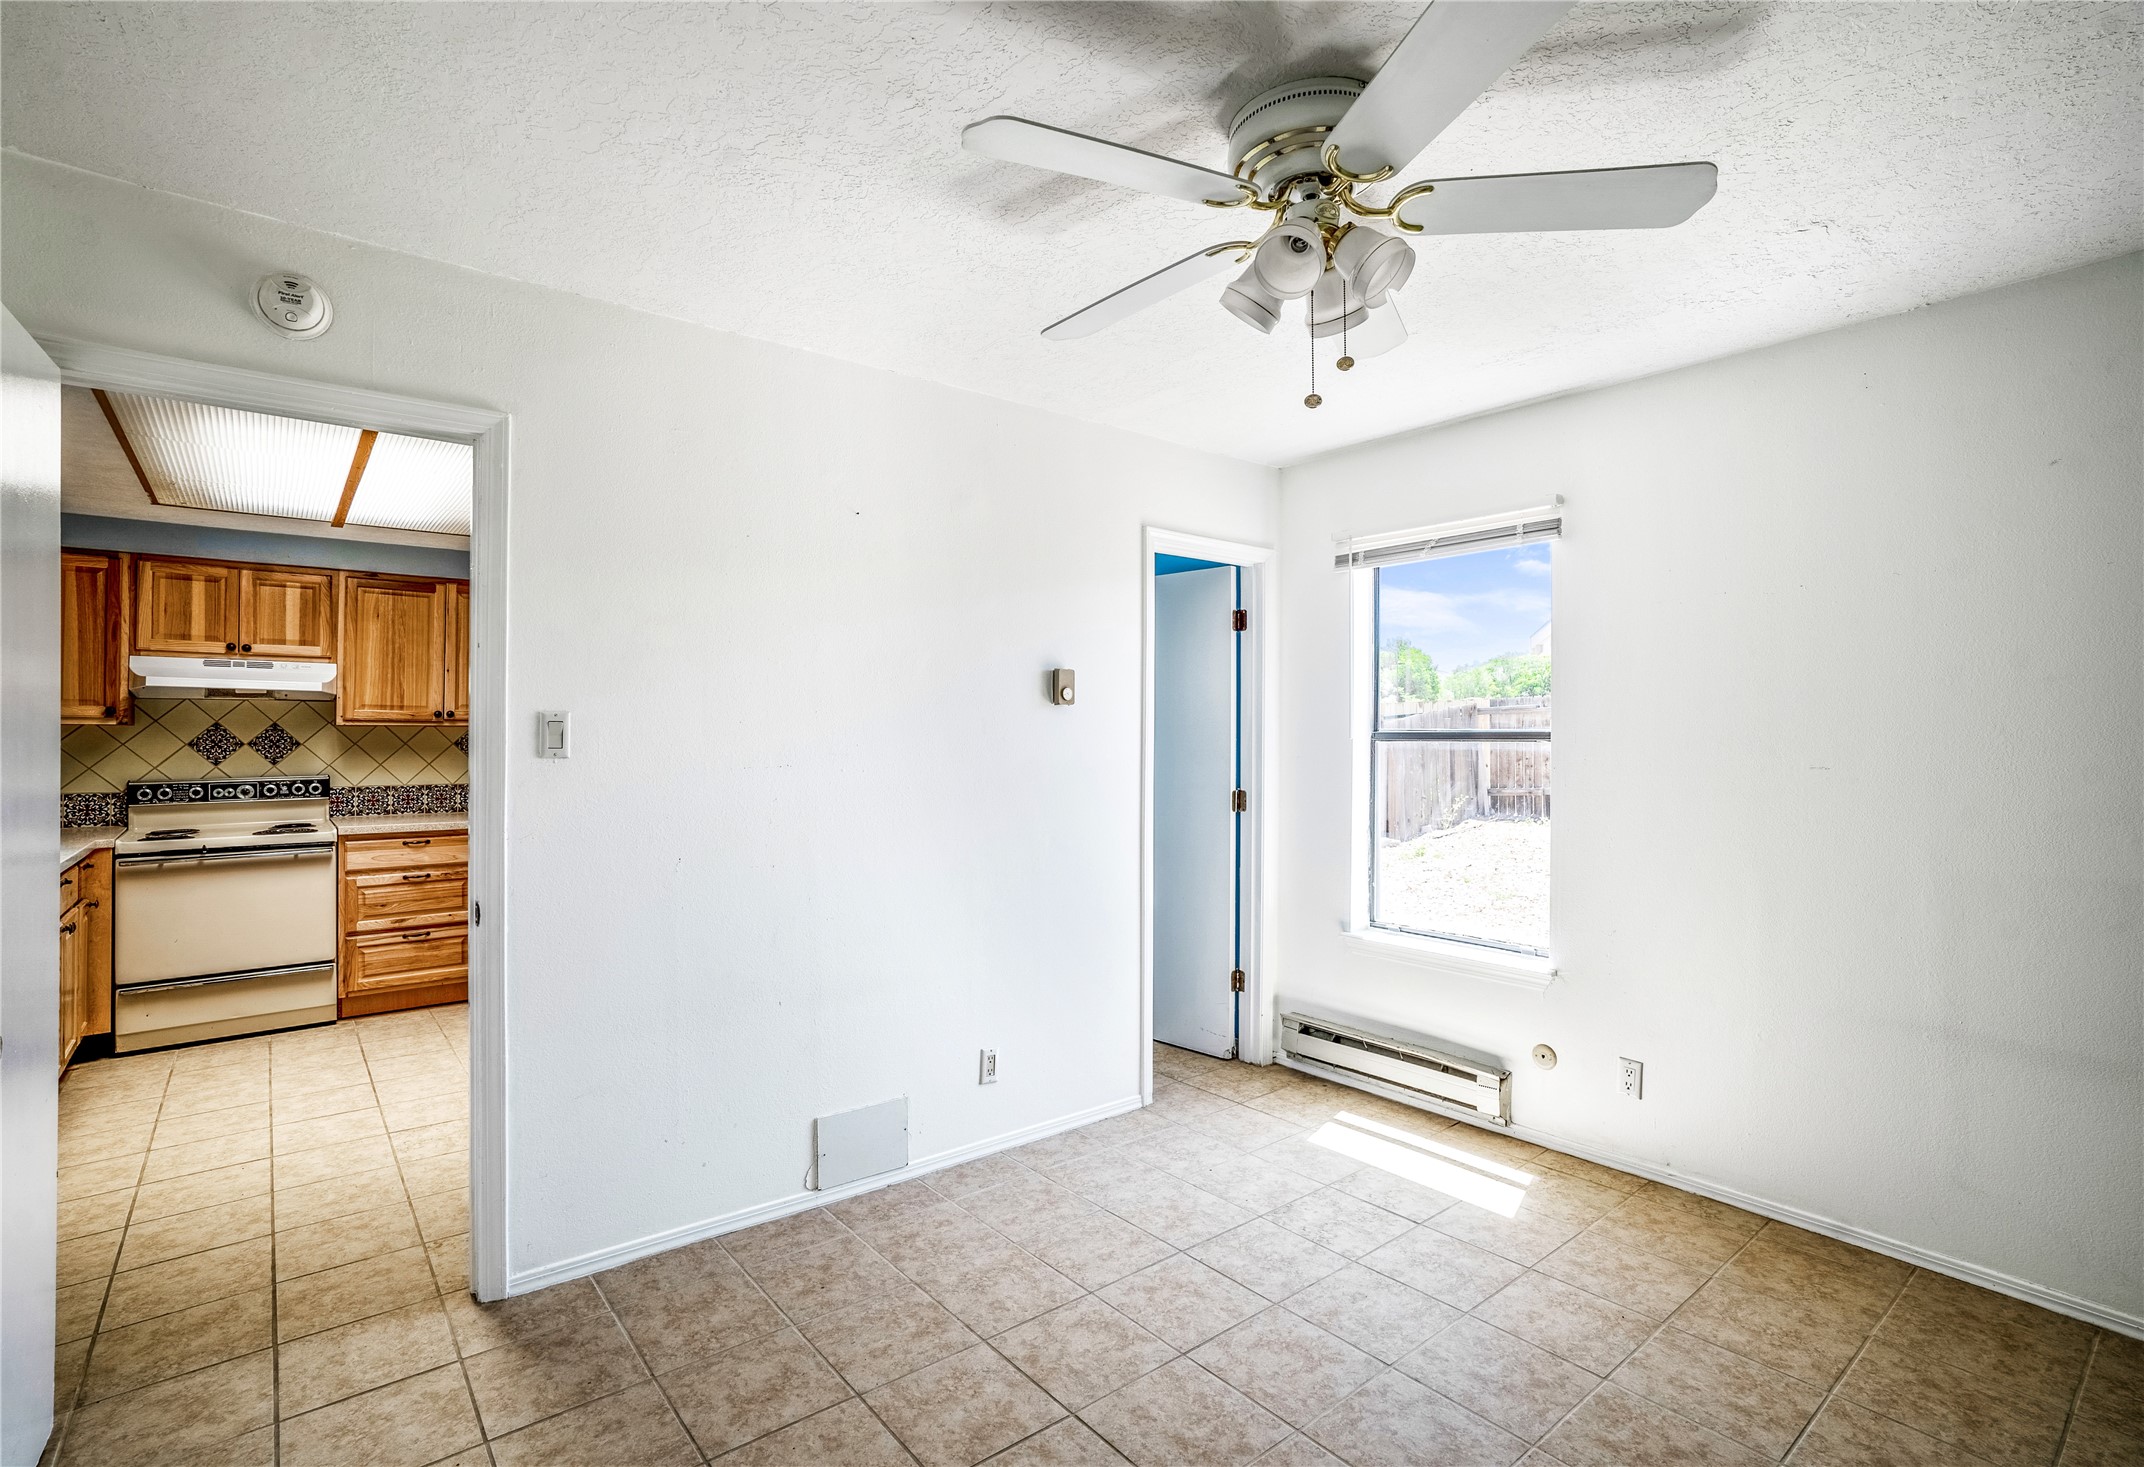 2710 Galisteo Court, Santa Fe, New Mexico 87505, 5 Bedrooms Bedrooms, ,5 BathroomsBathrooms,Residential,For Sale,2710 Galisteo Court,202338108